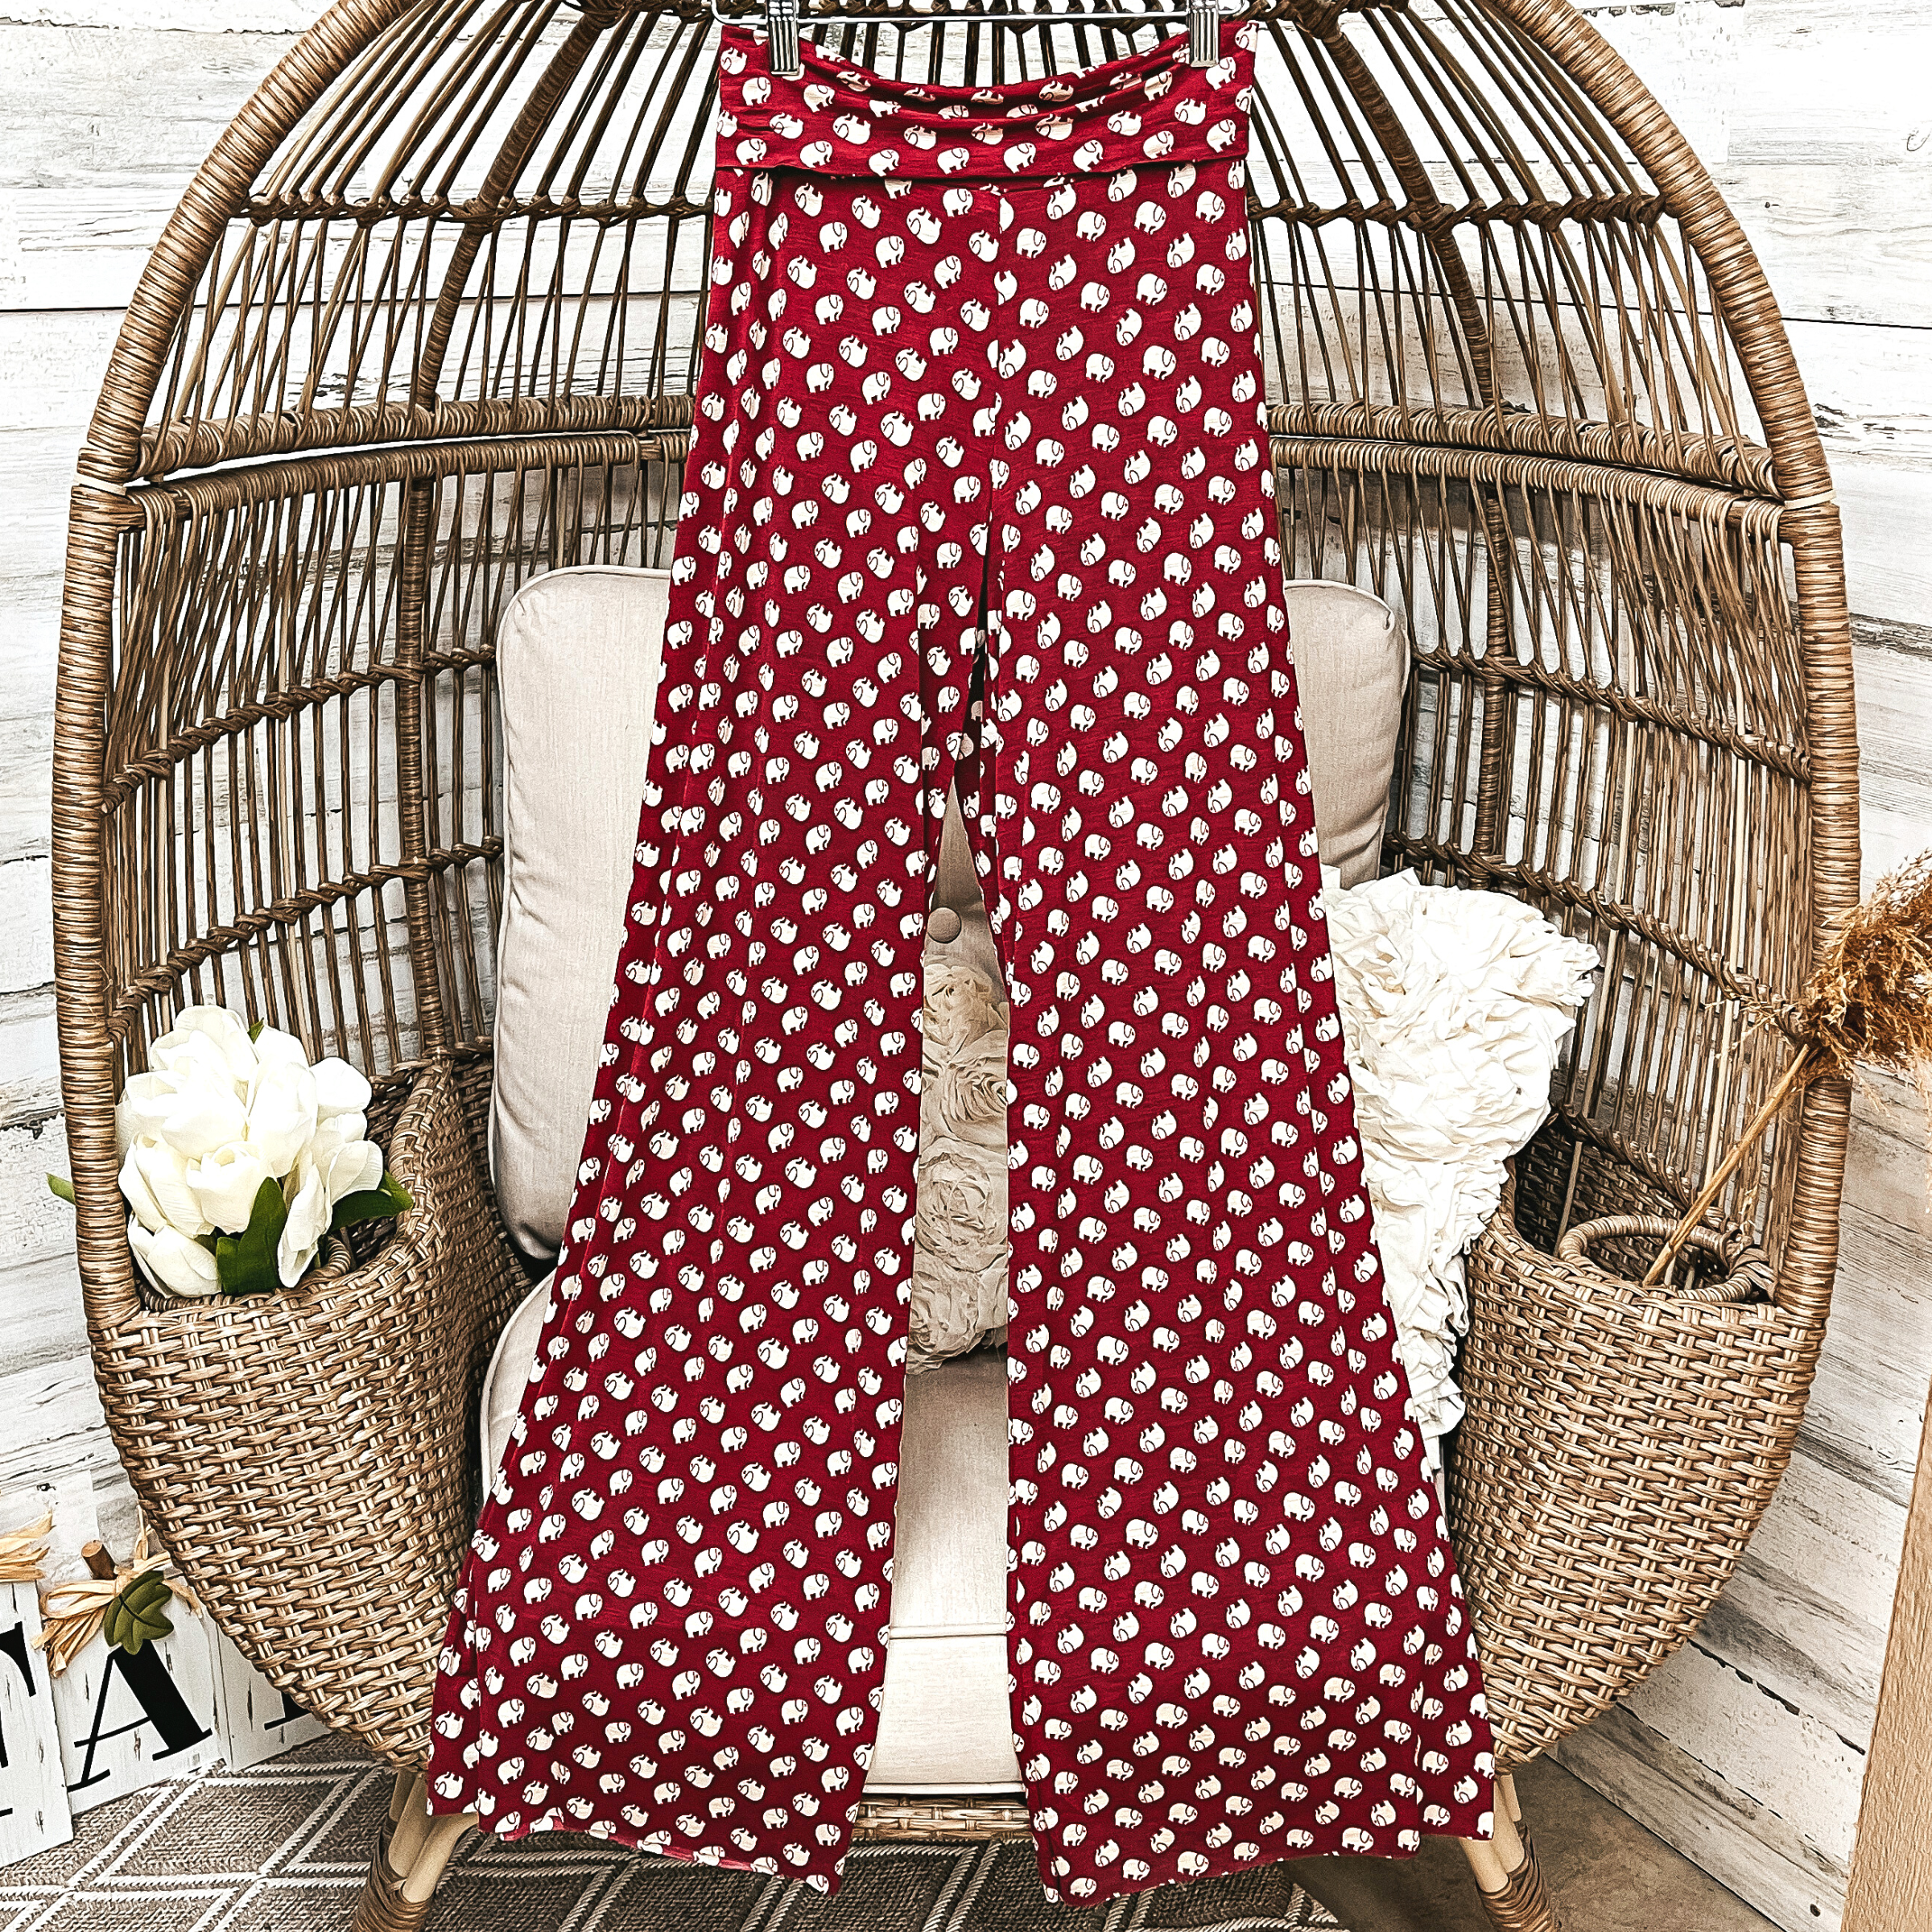 Elephant Print Wide Leg Pants in Maroon and White - Giddy Up Glamour Boutique